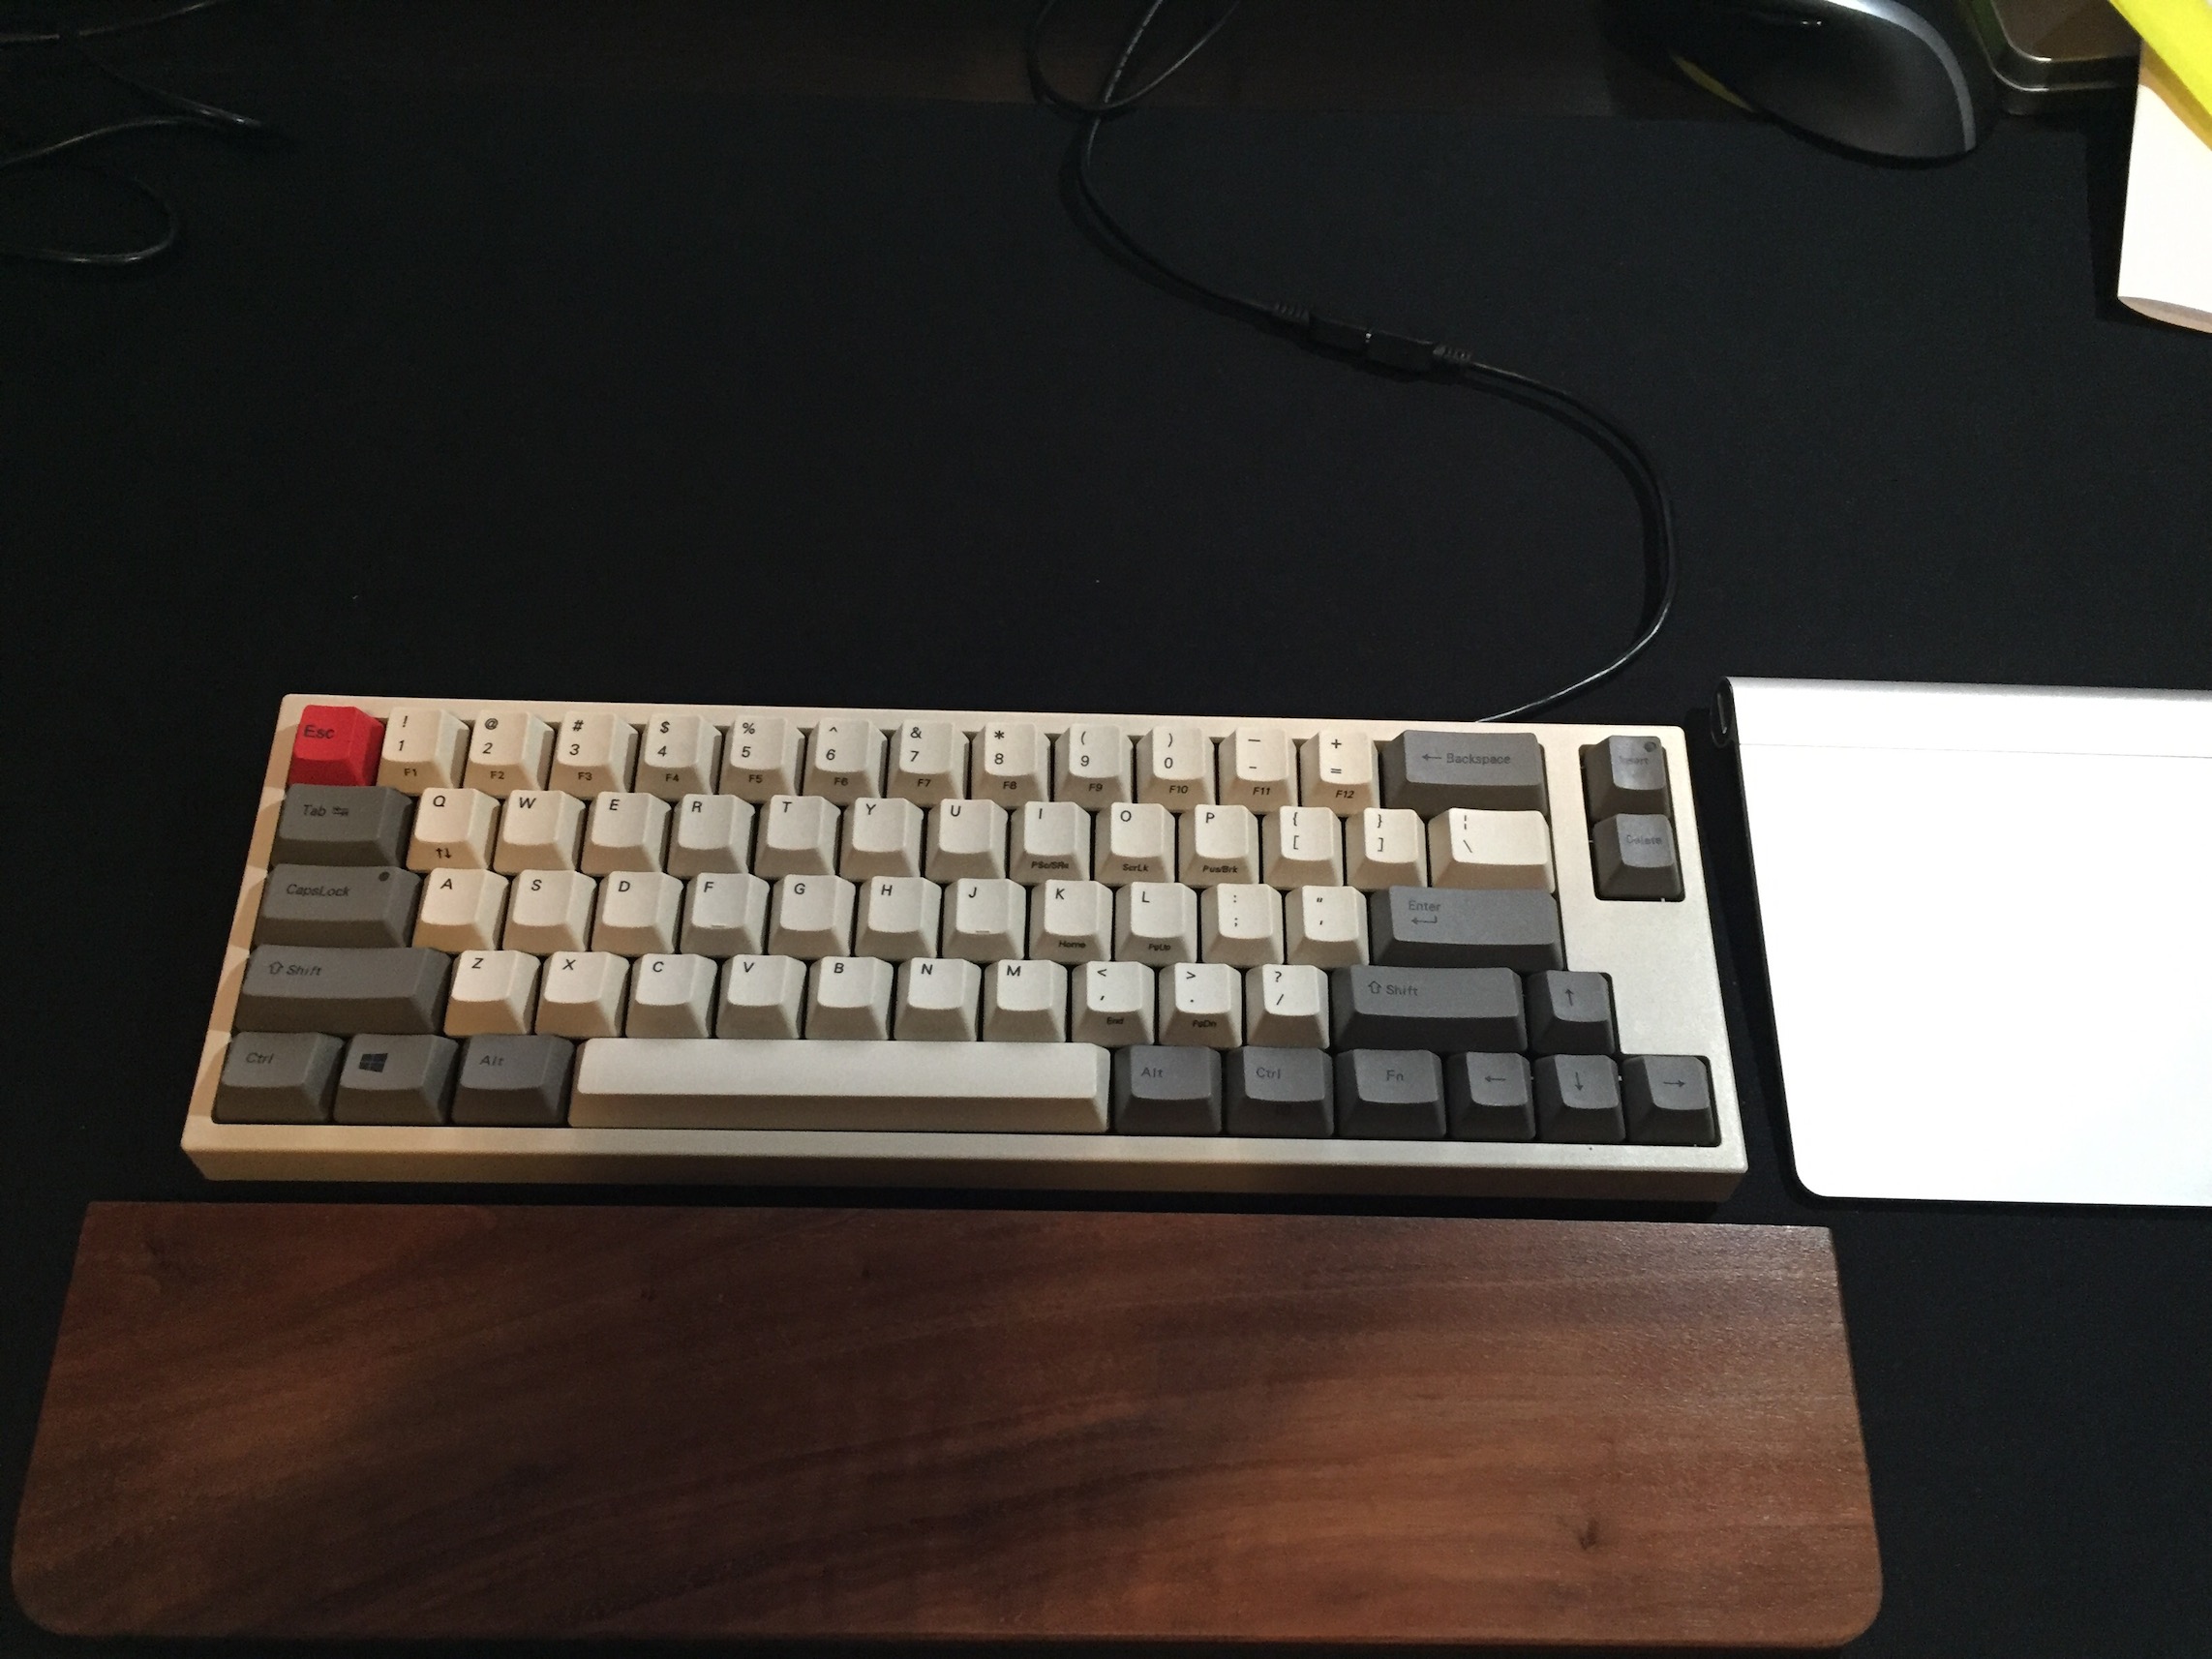 FC660C with red Esc Keycap goodness